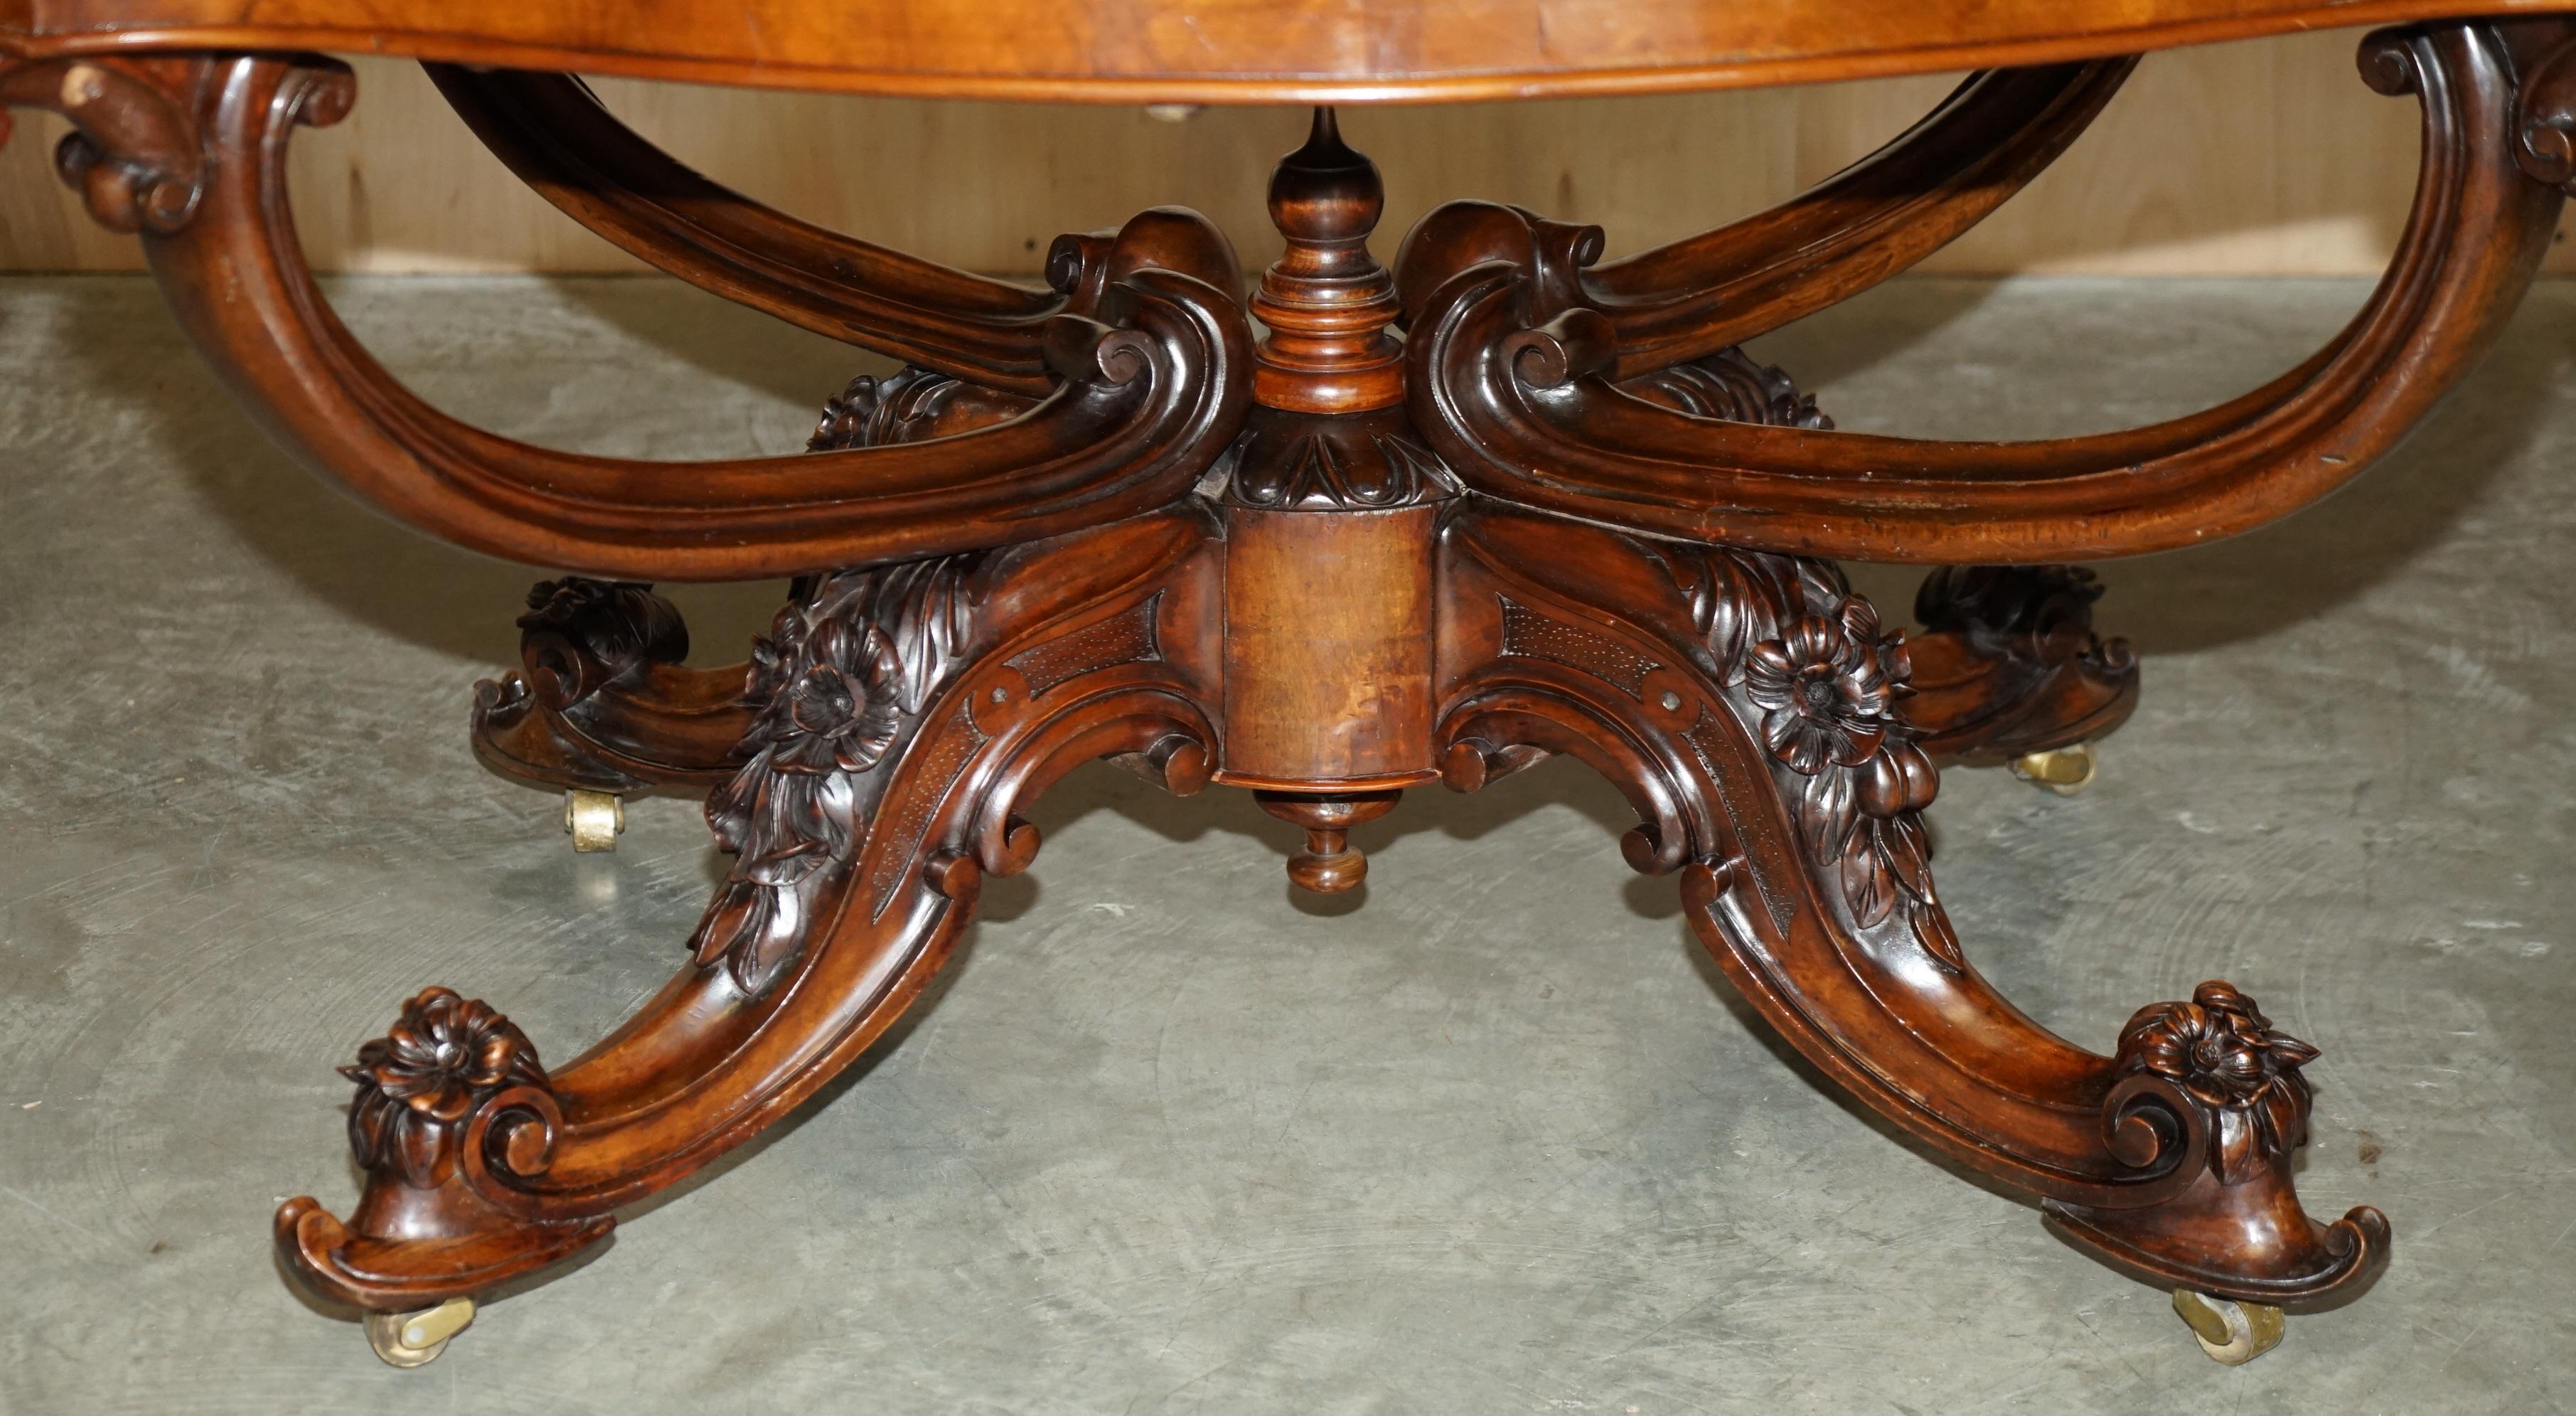 High Victorian Very Fine circa 1860 Antique Victorian Ornately Carved Centre Burr Walnut Table For Sale